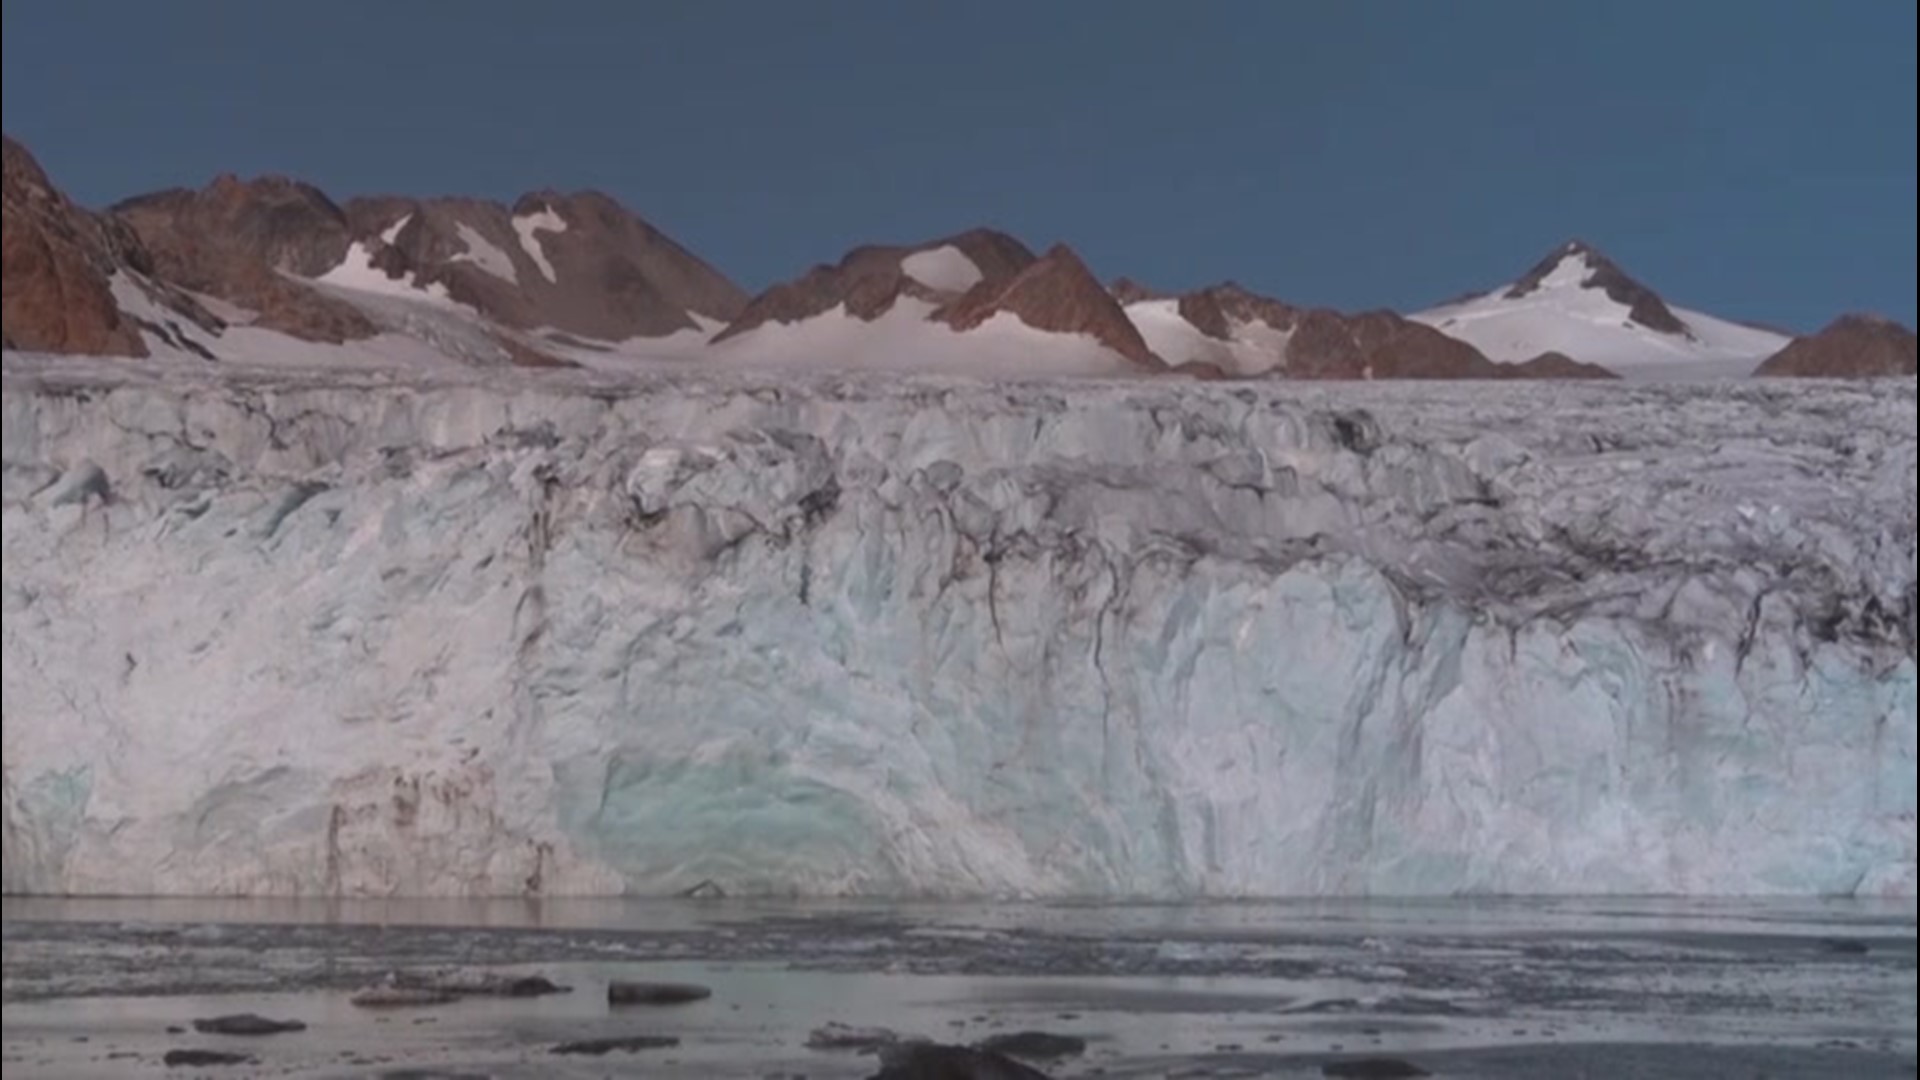 Researchers with Ohio State University say the glaciers that cover much of Greenland are 'past the tipping point', and can no longer be saved, even if the impacts of climate change came to an end.